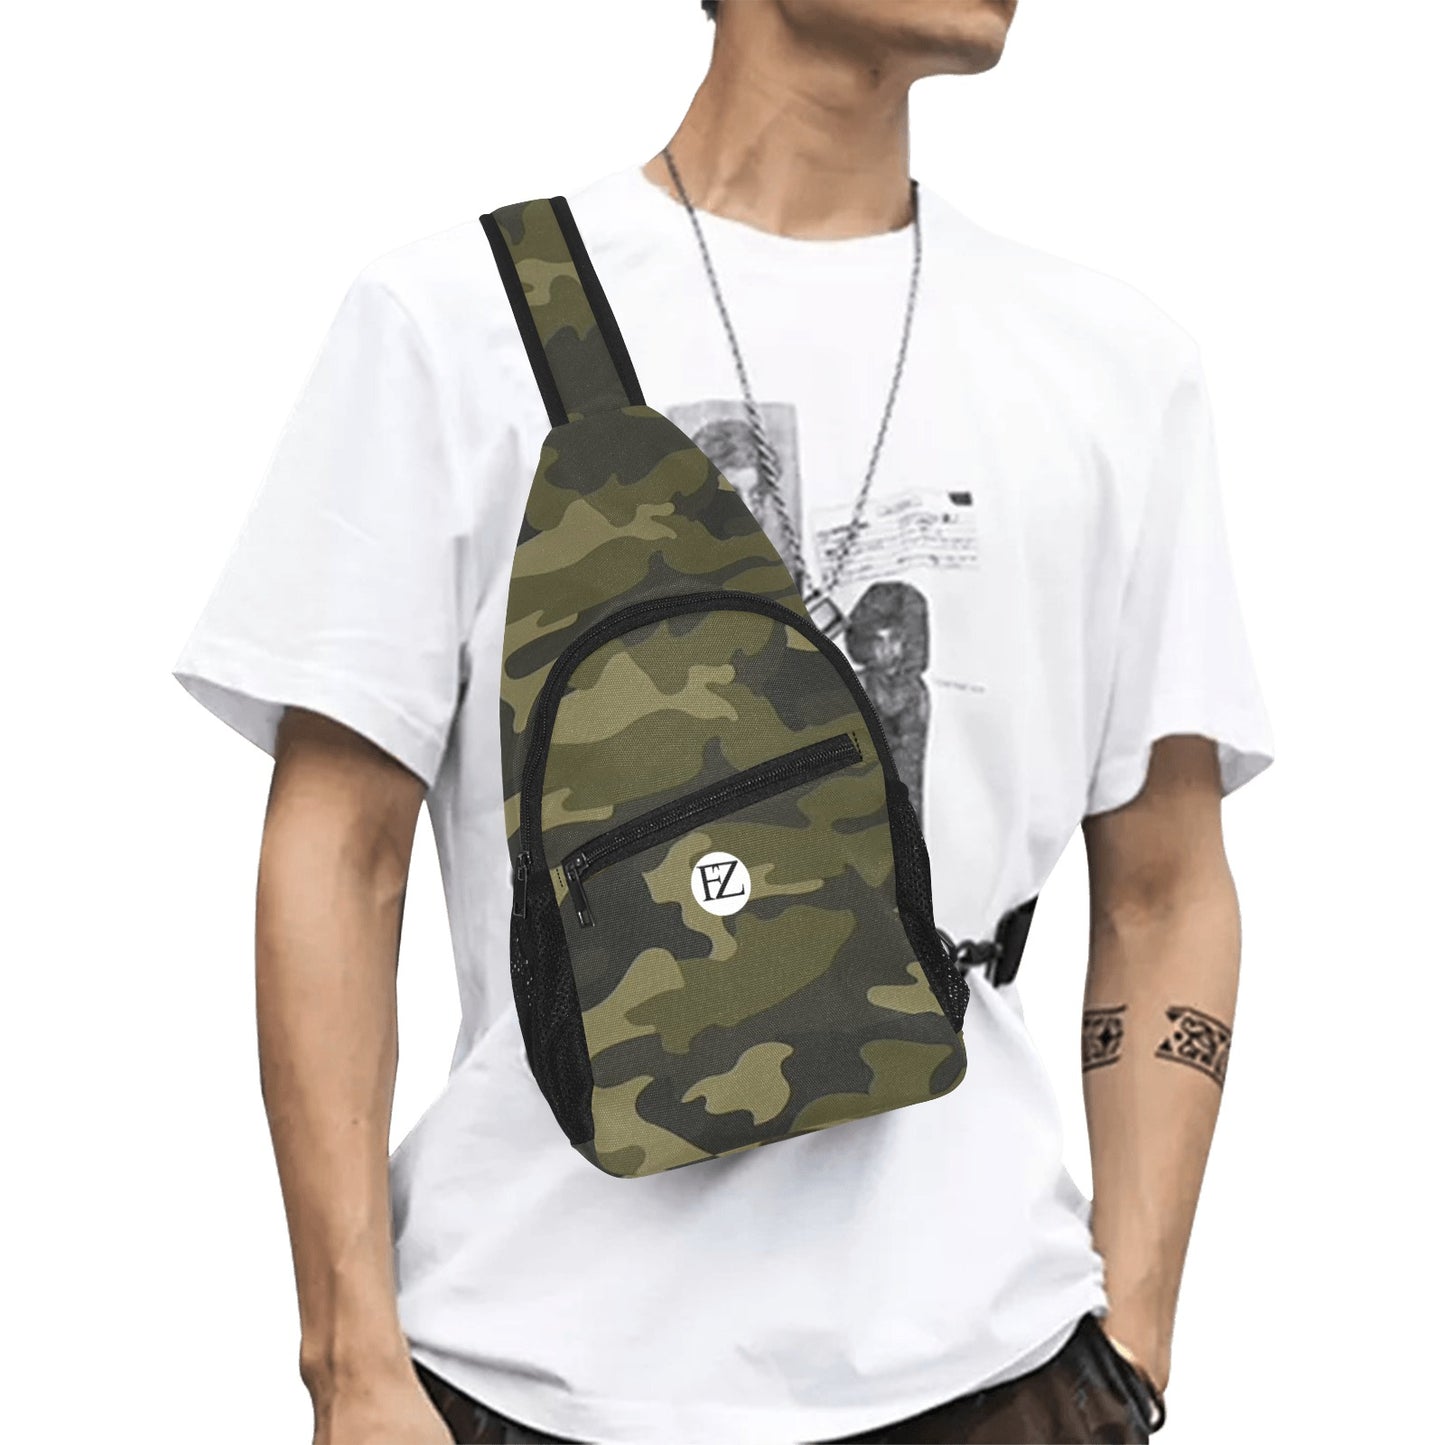 fz men's chest bag too one size / fz chest bag-army all over print chest bag(model1719)